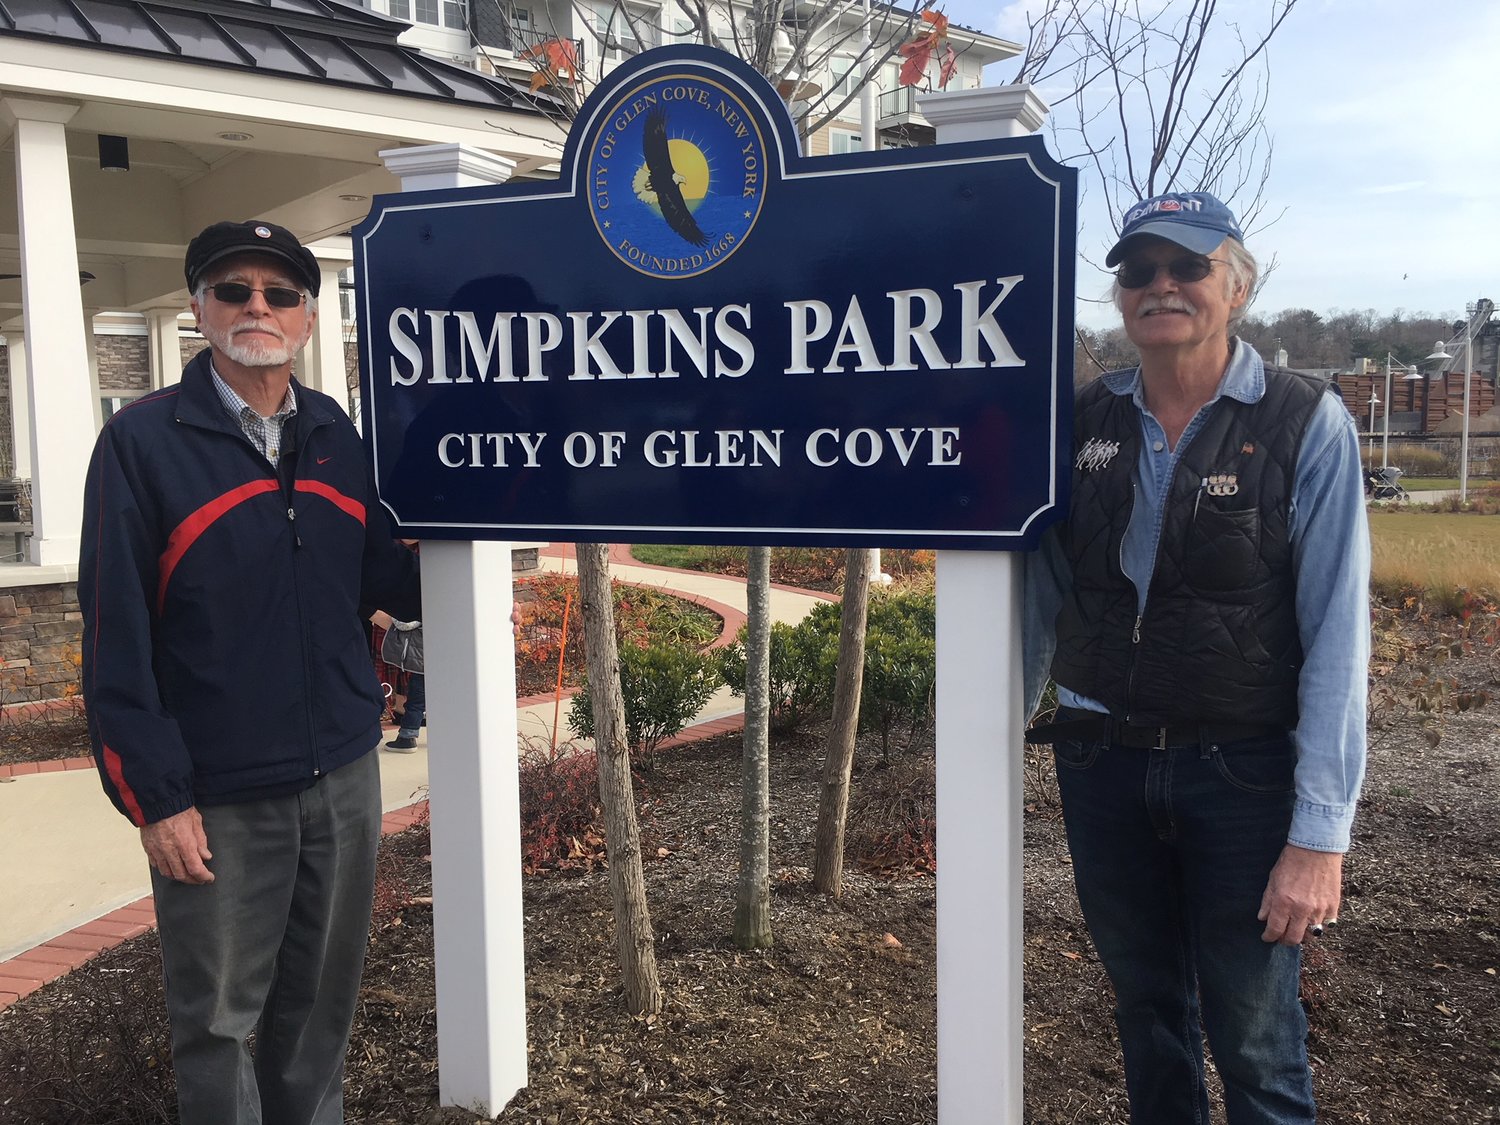 Herb and Dave Schierhorst, of Glen Cove and Sea Cliff, respectively, are descendants of Nicholas Simkins, whose name will be corrected on the sign that was unveiled on Dec. 16.